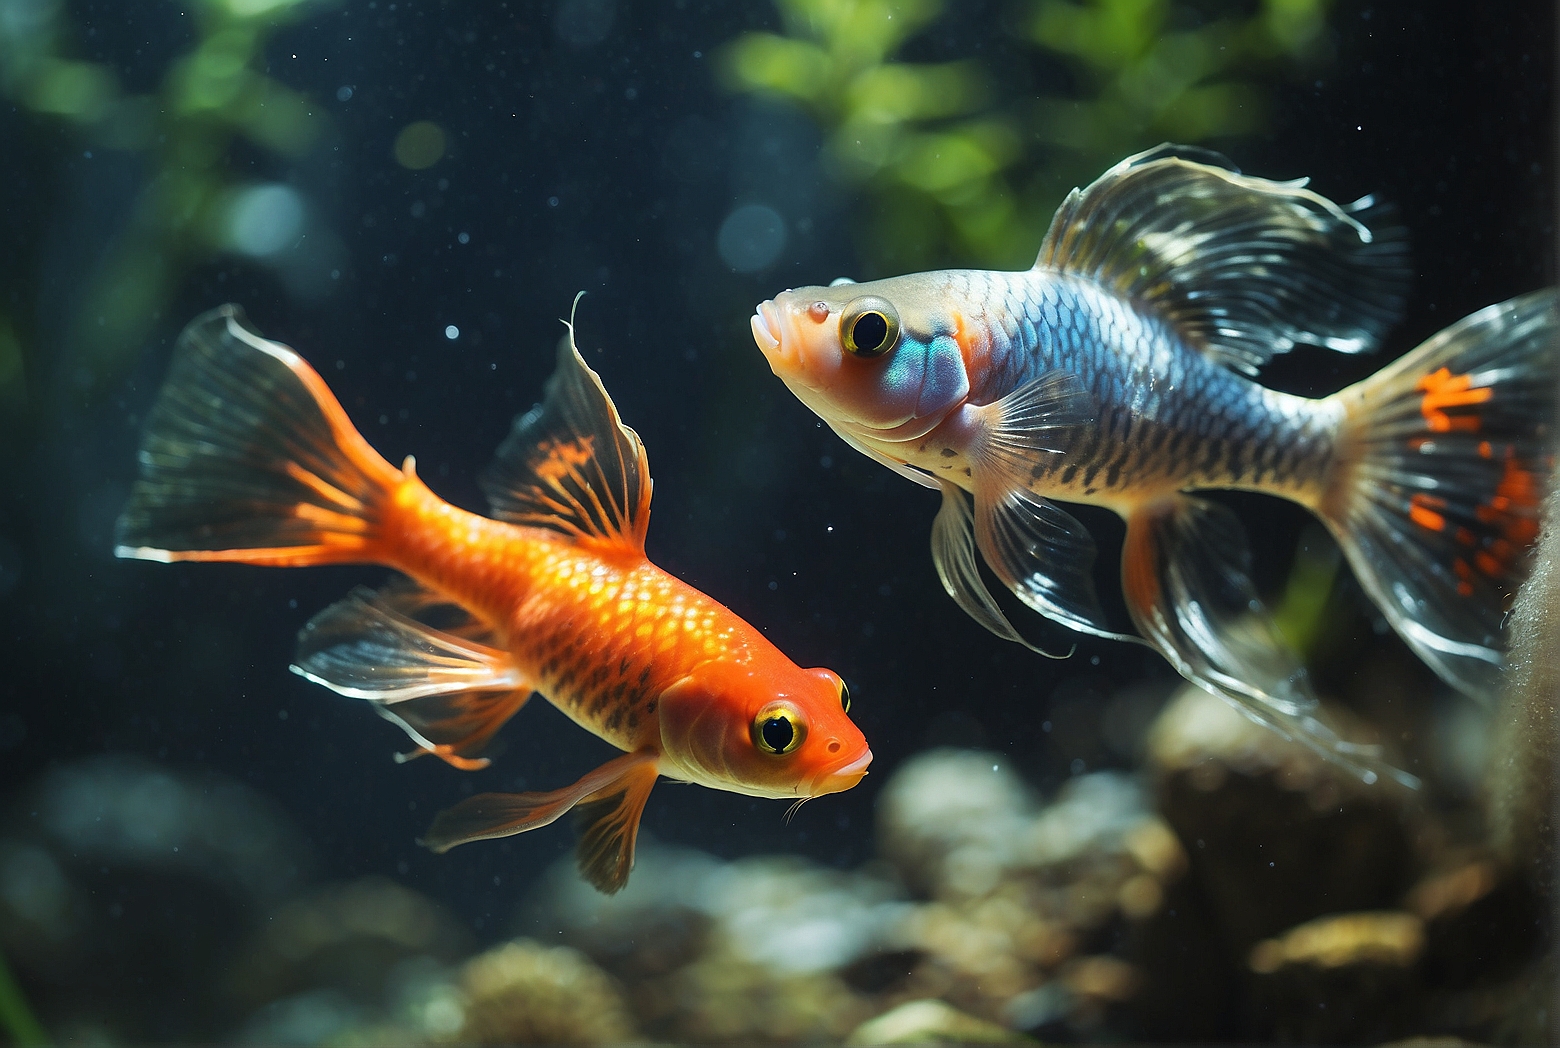 Can mollies and guppies coexist?